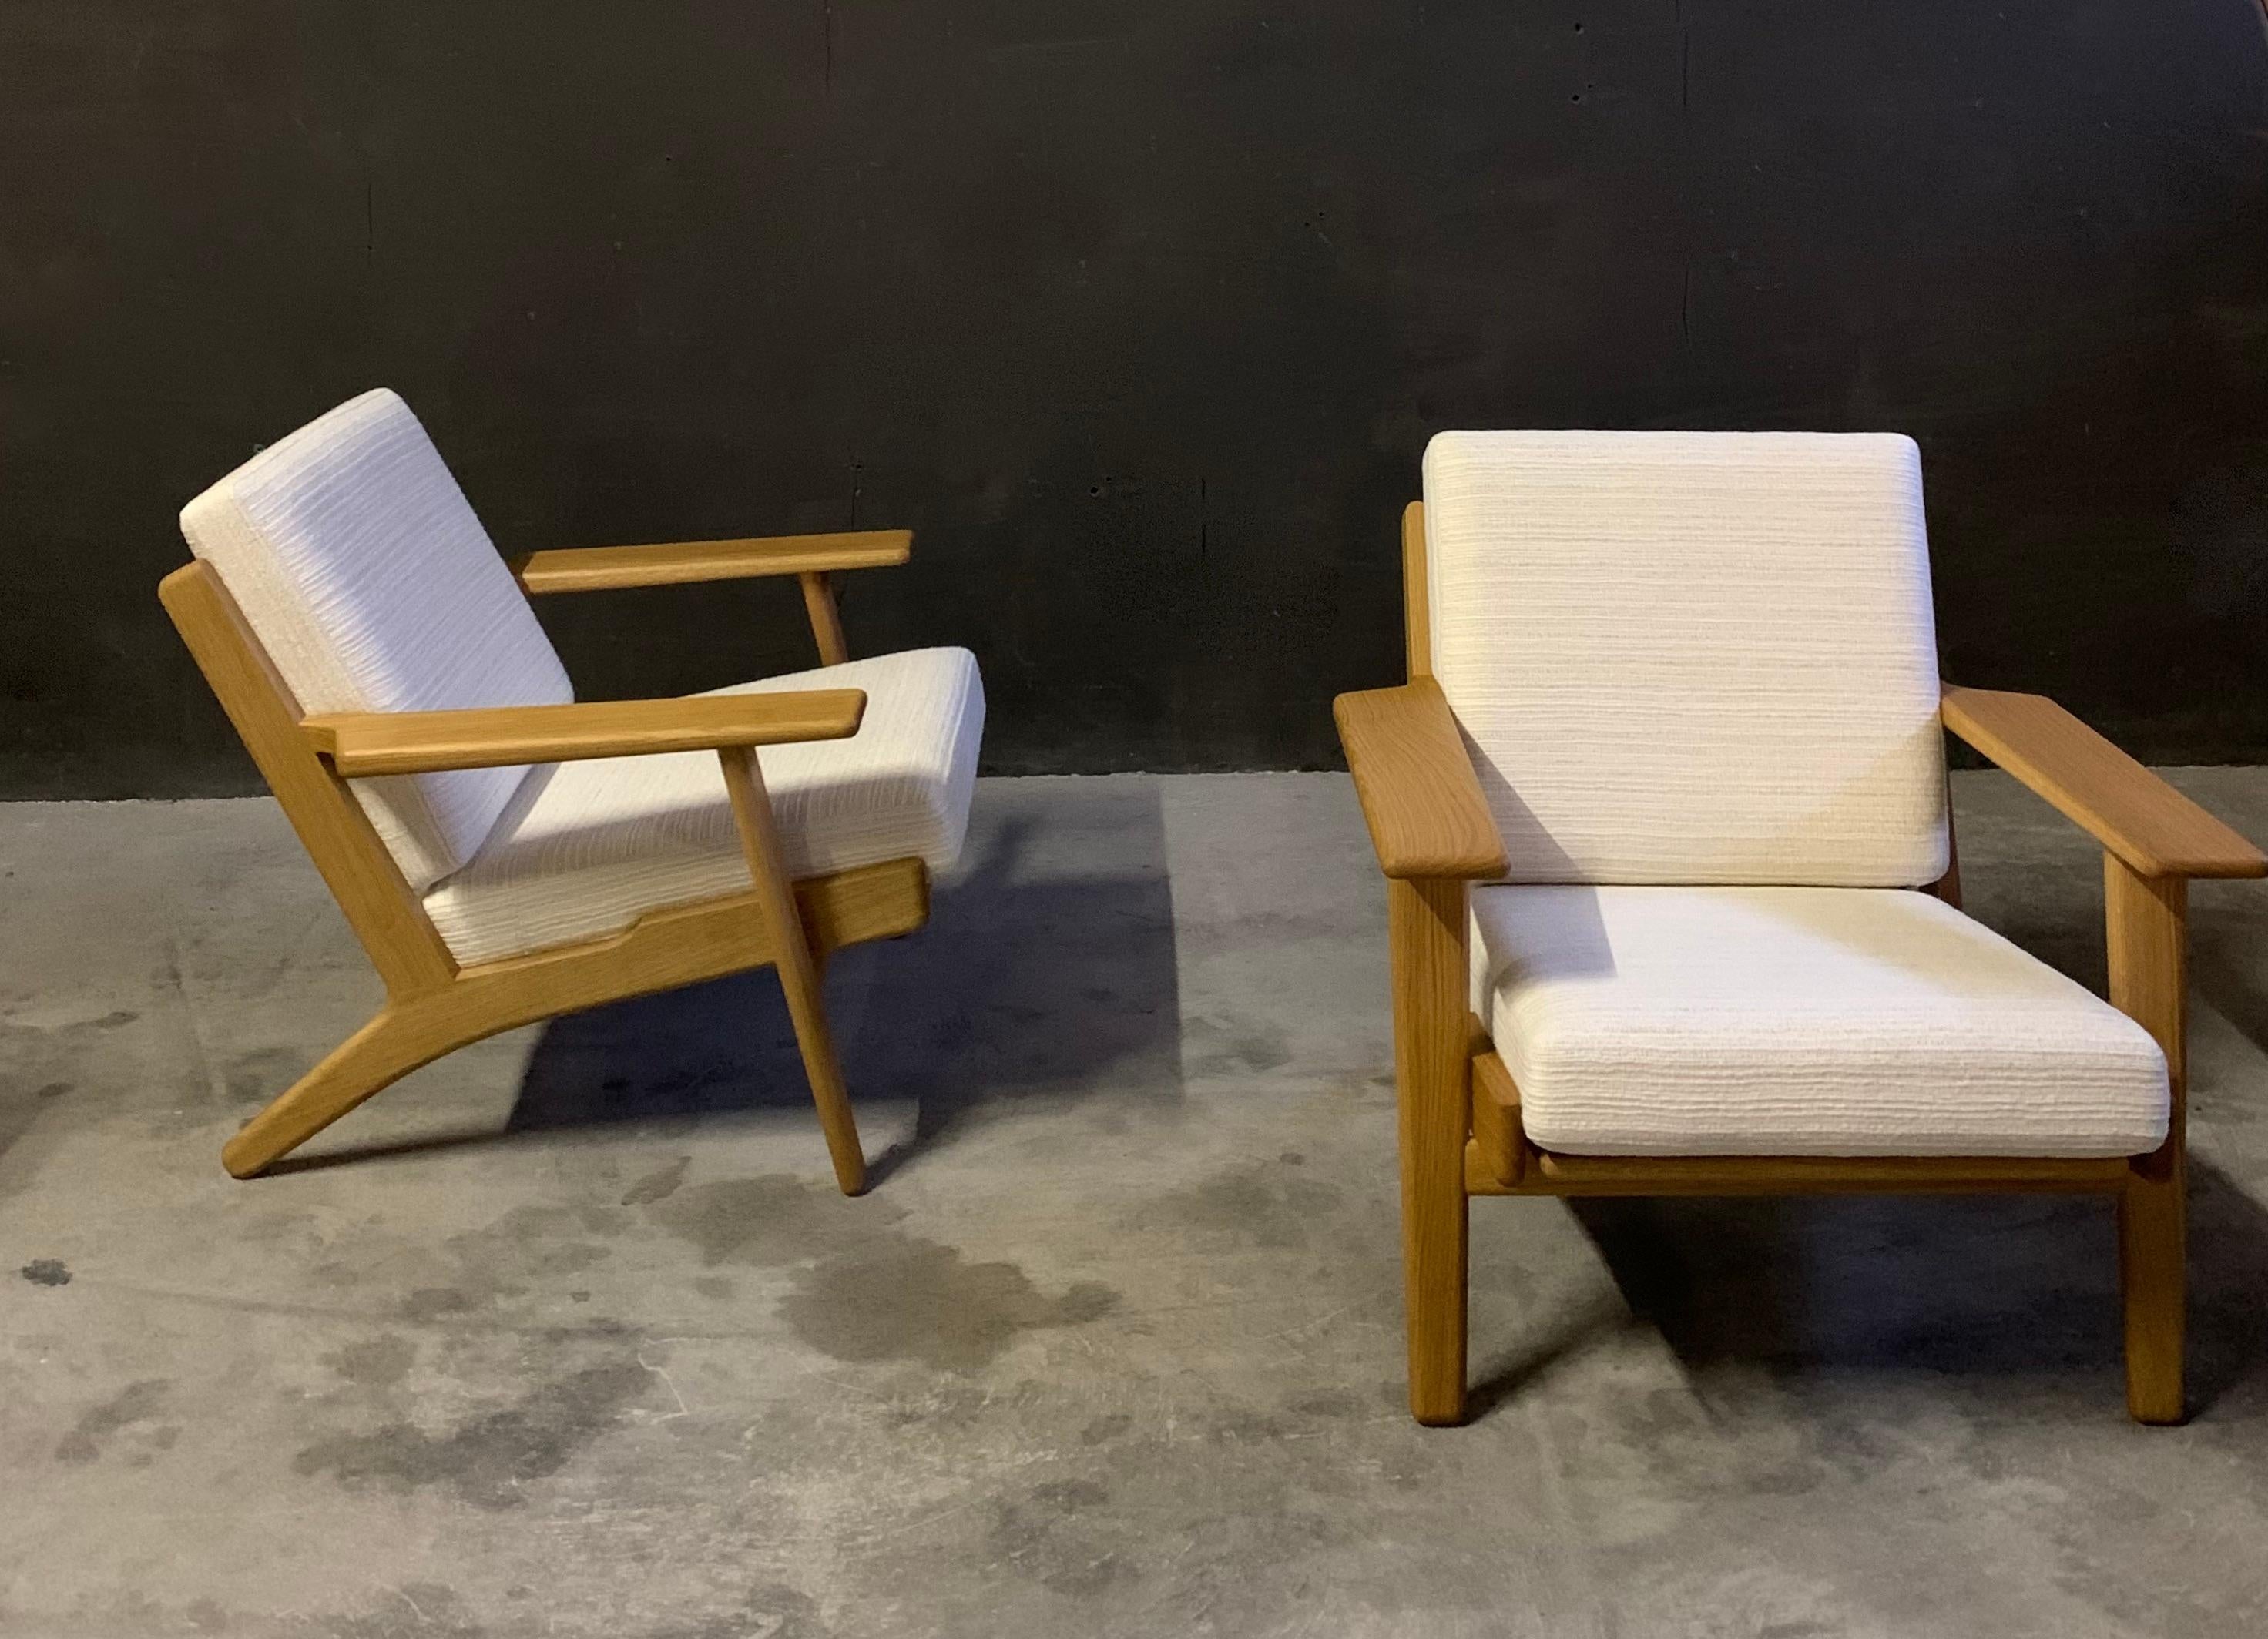 GE290 lounge chair by Hans J. Wegner, GETAMA, Denmark. Pair available, listed individually. Solid oiled oak frames, loose cushions upholstered in a premium off-white handwoven bespoke fabric. Sample available upon request. 
   
Lounge chair GE290 is